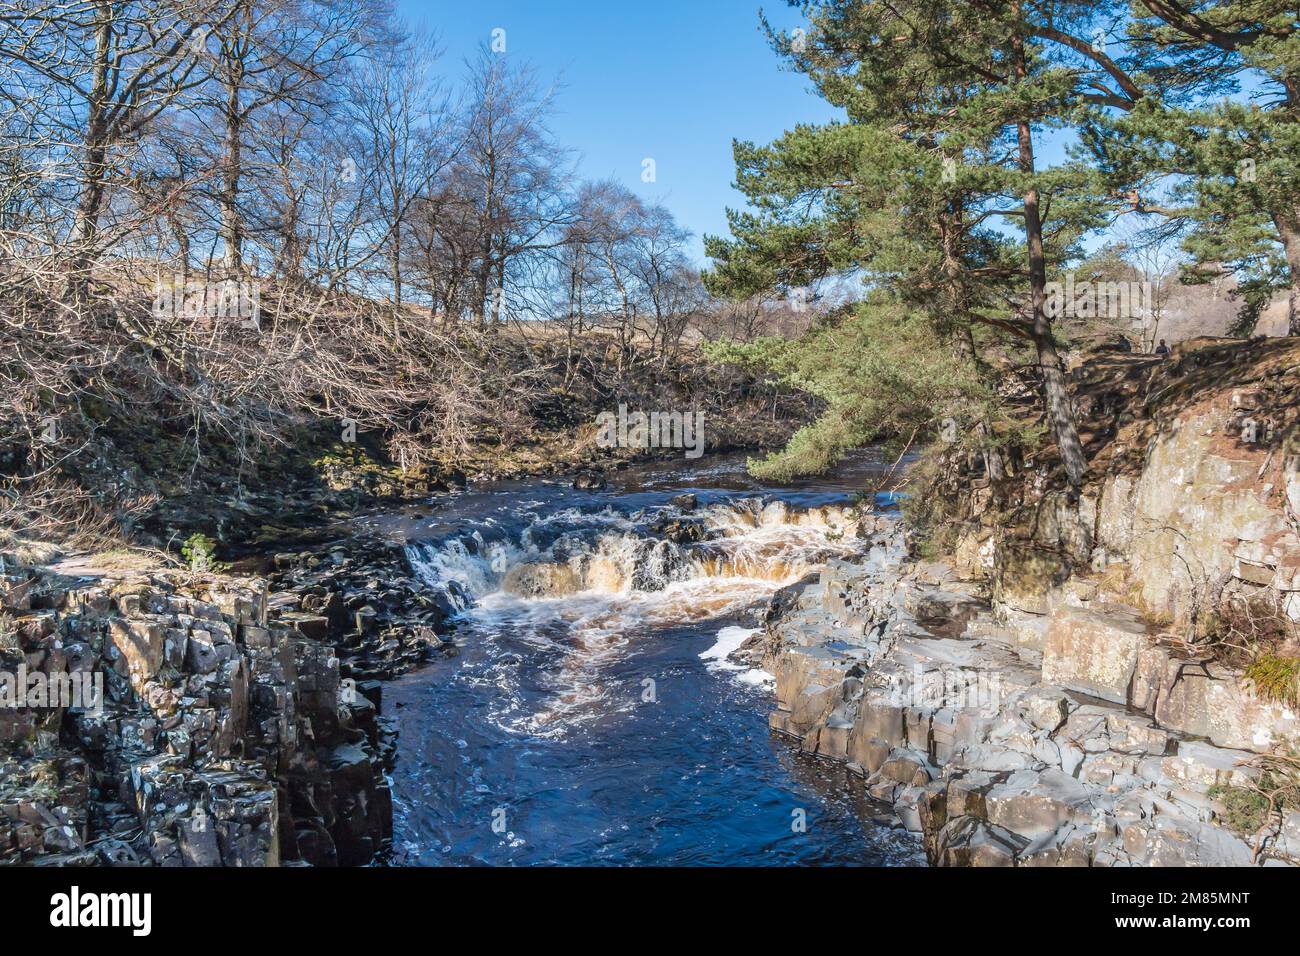 The River Tees tumbles over this cascade just below the main Low Force Waterfall. Stock Photo